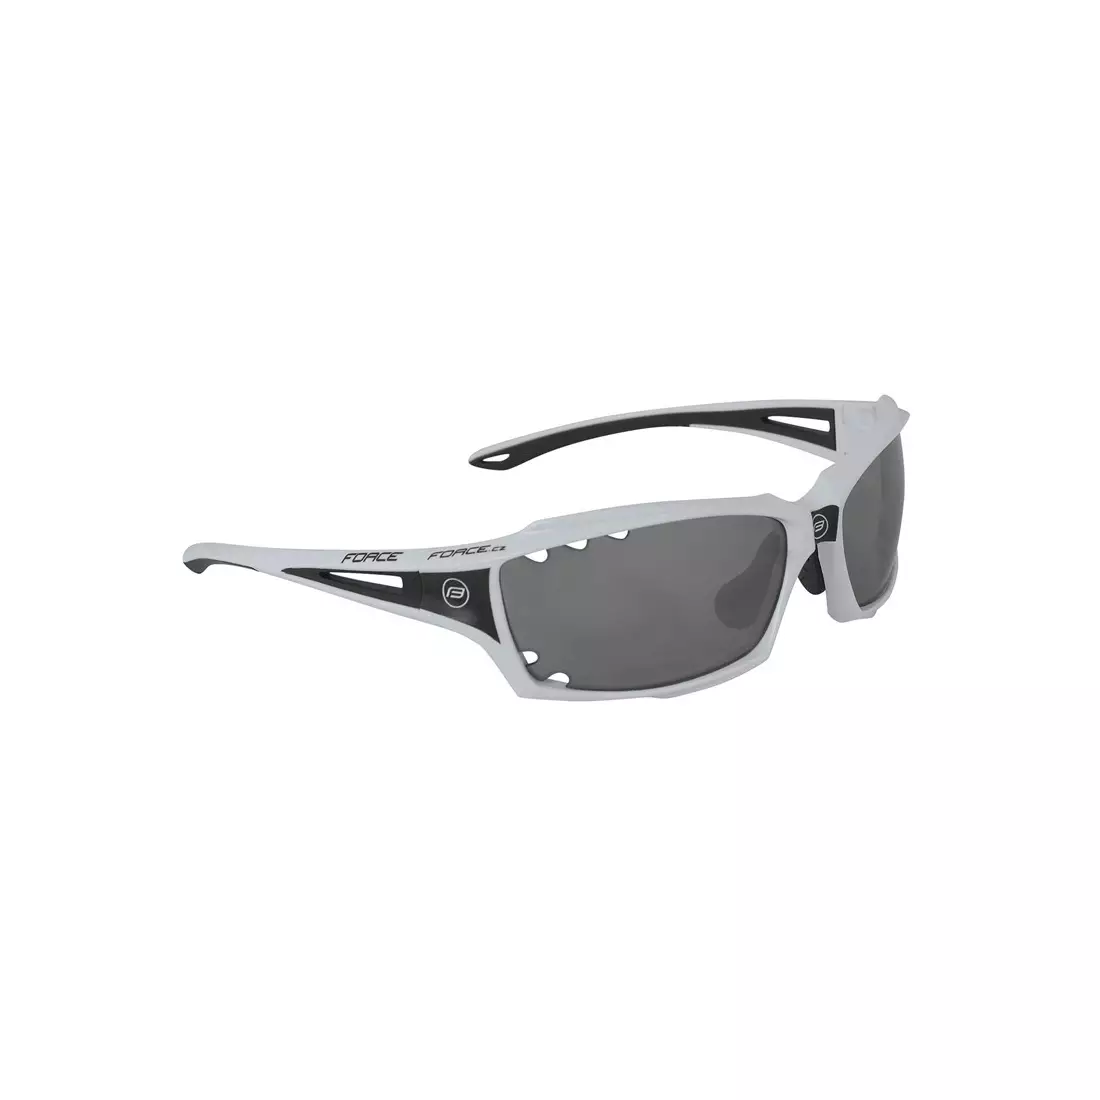 FORCE VISION White and black glasses 90972